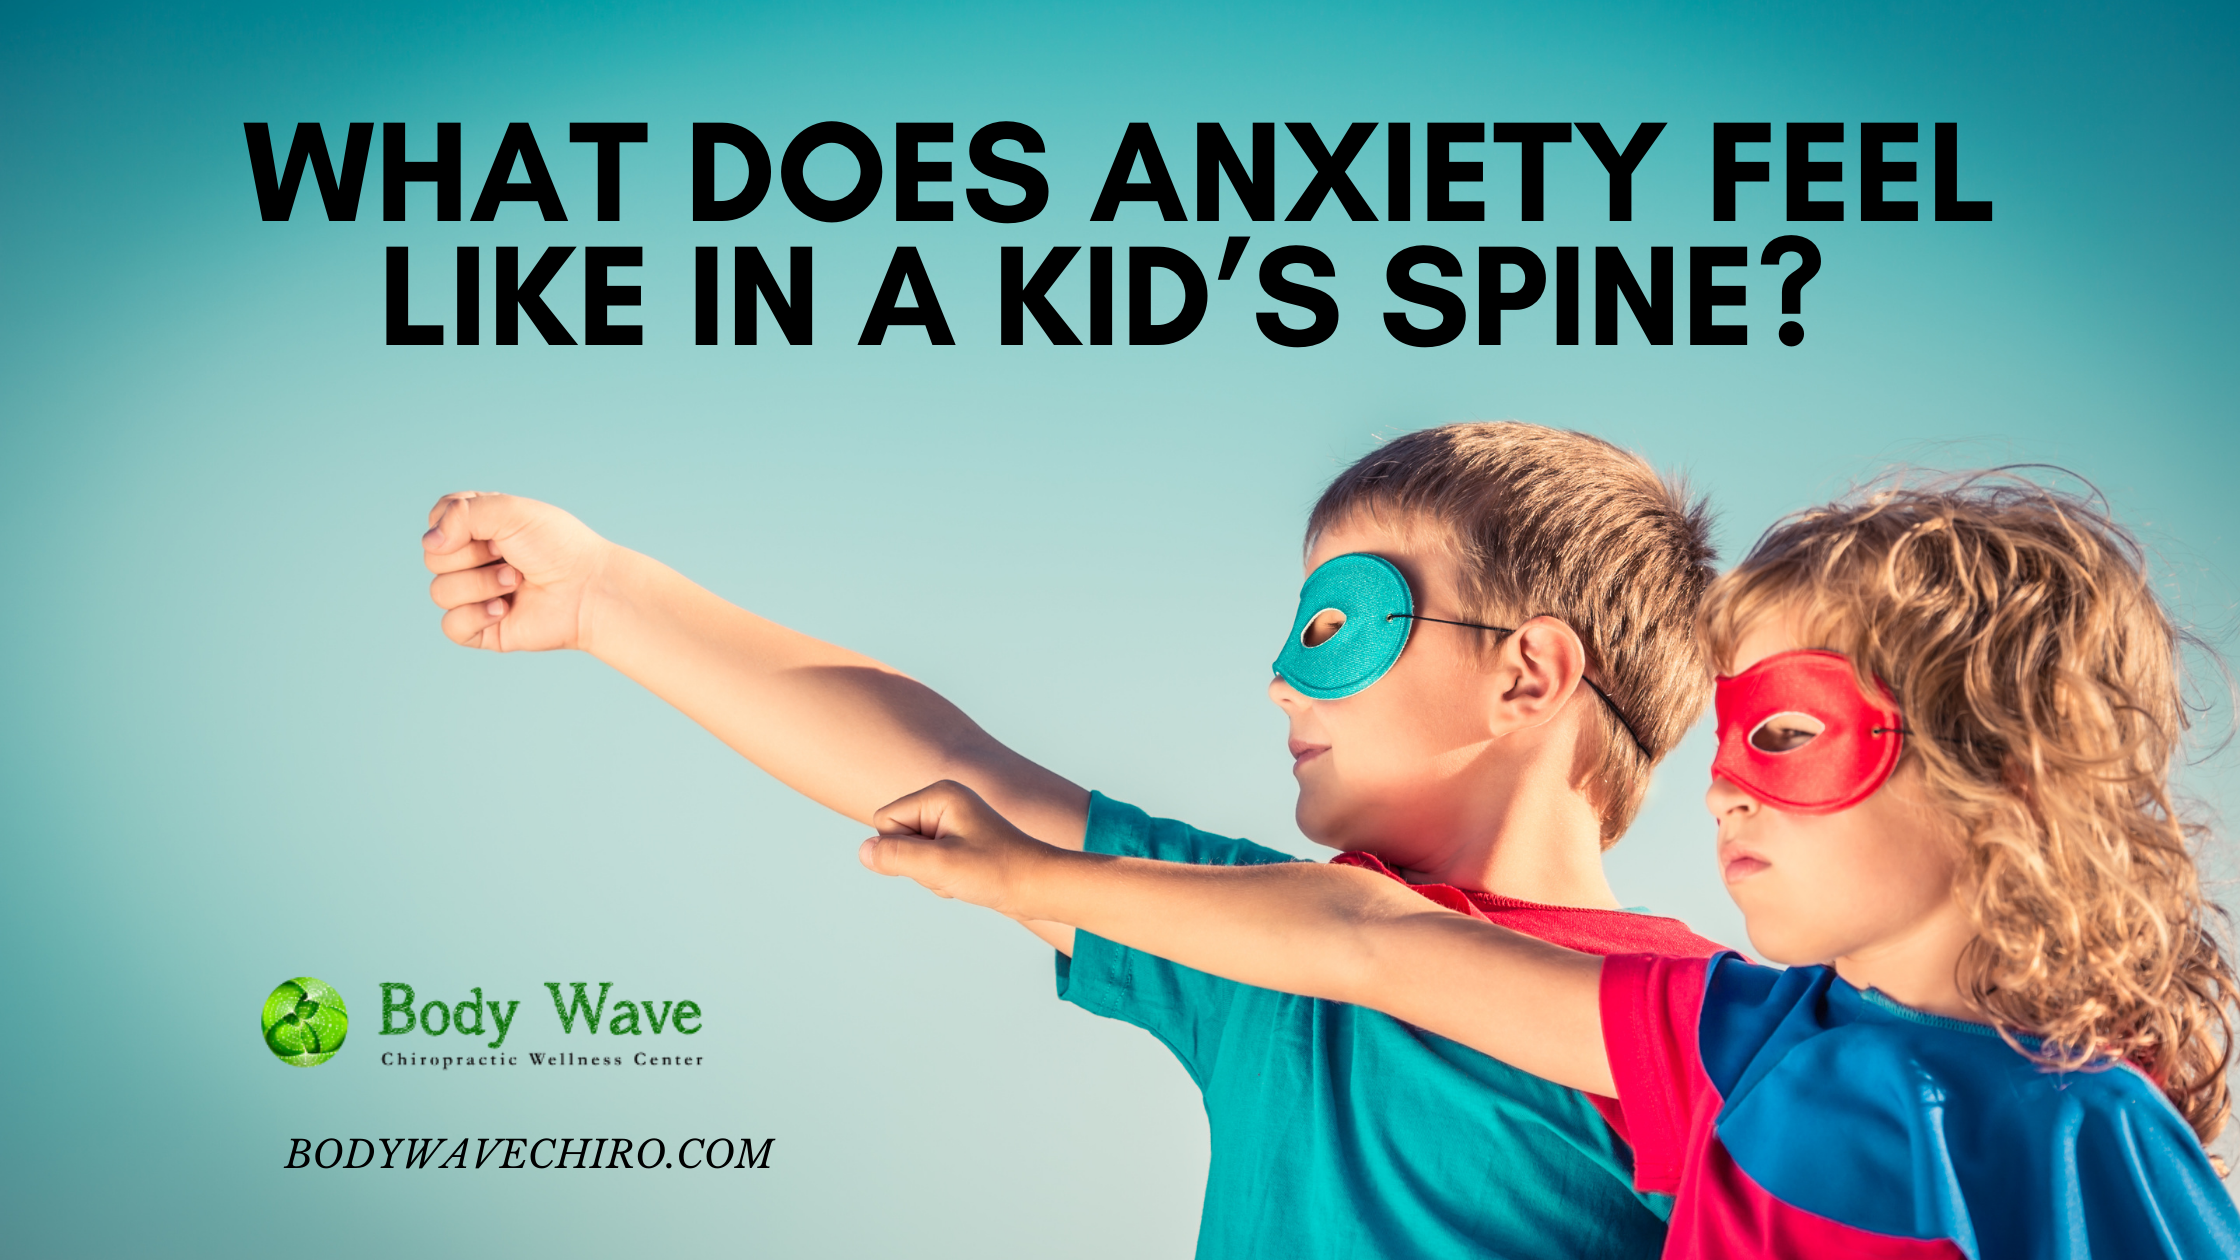 ANXIETY IN A KIDS SPINE